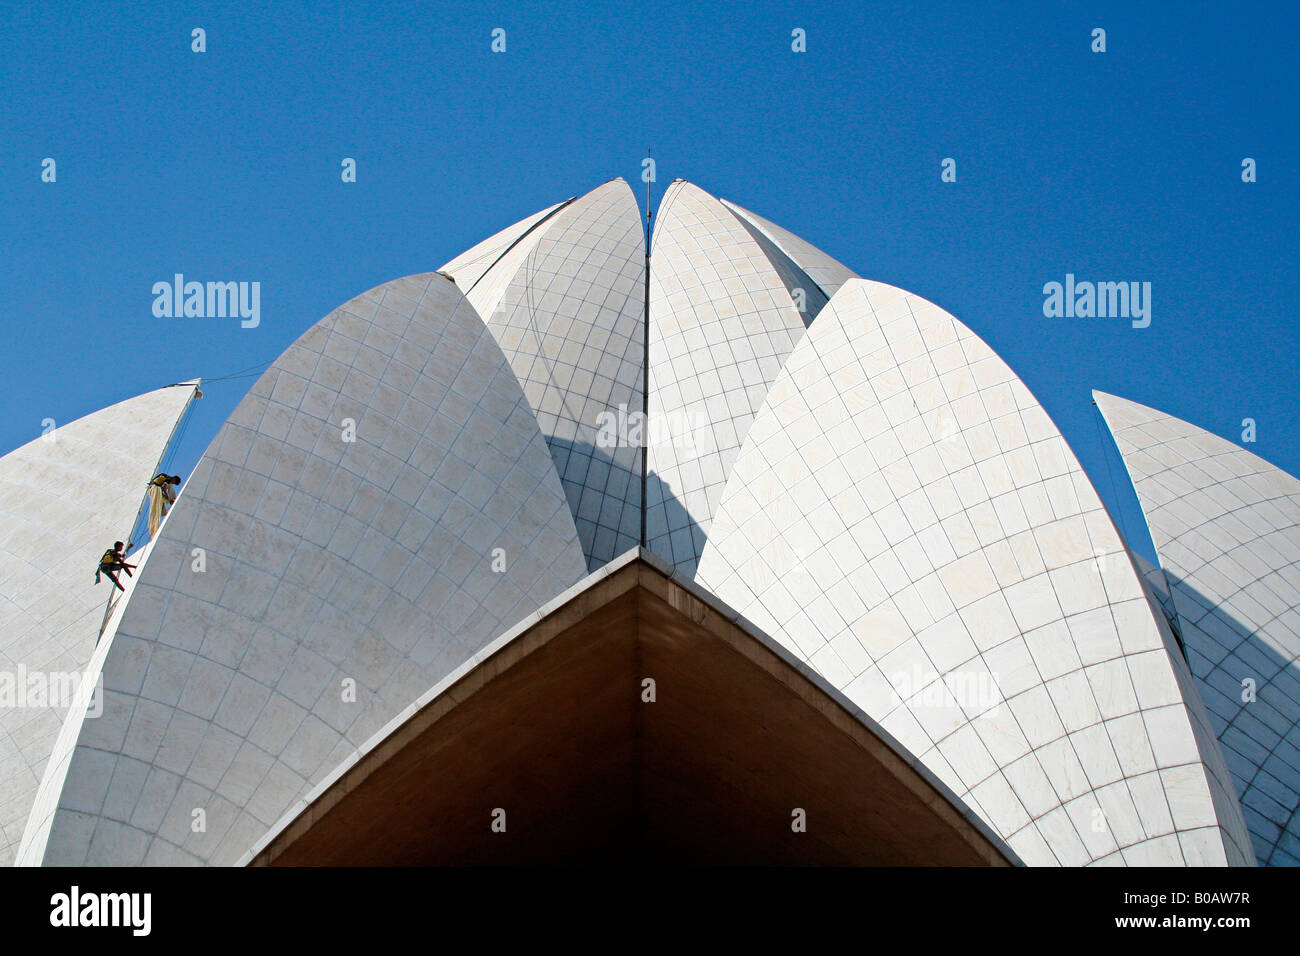 Places of worship - climbers scampering up petal shaped dome roof of the lotus temple - famous landmark in New Delhi Stock Photo